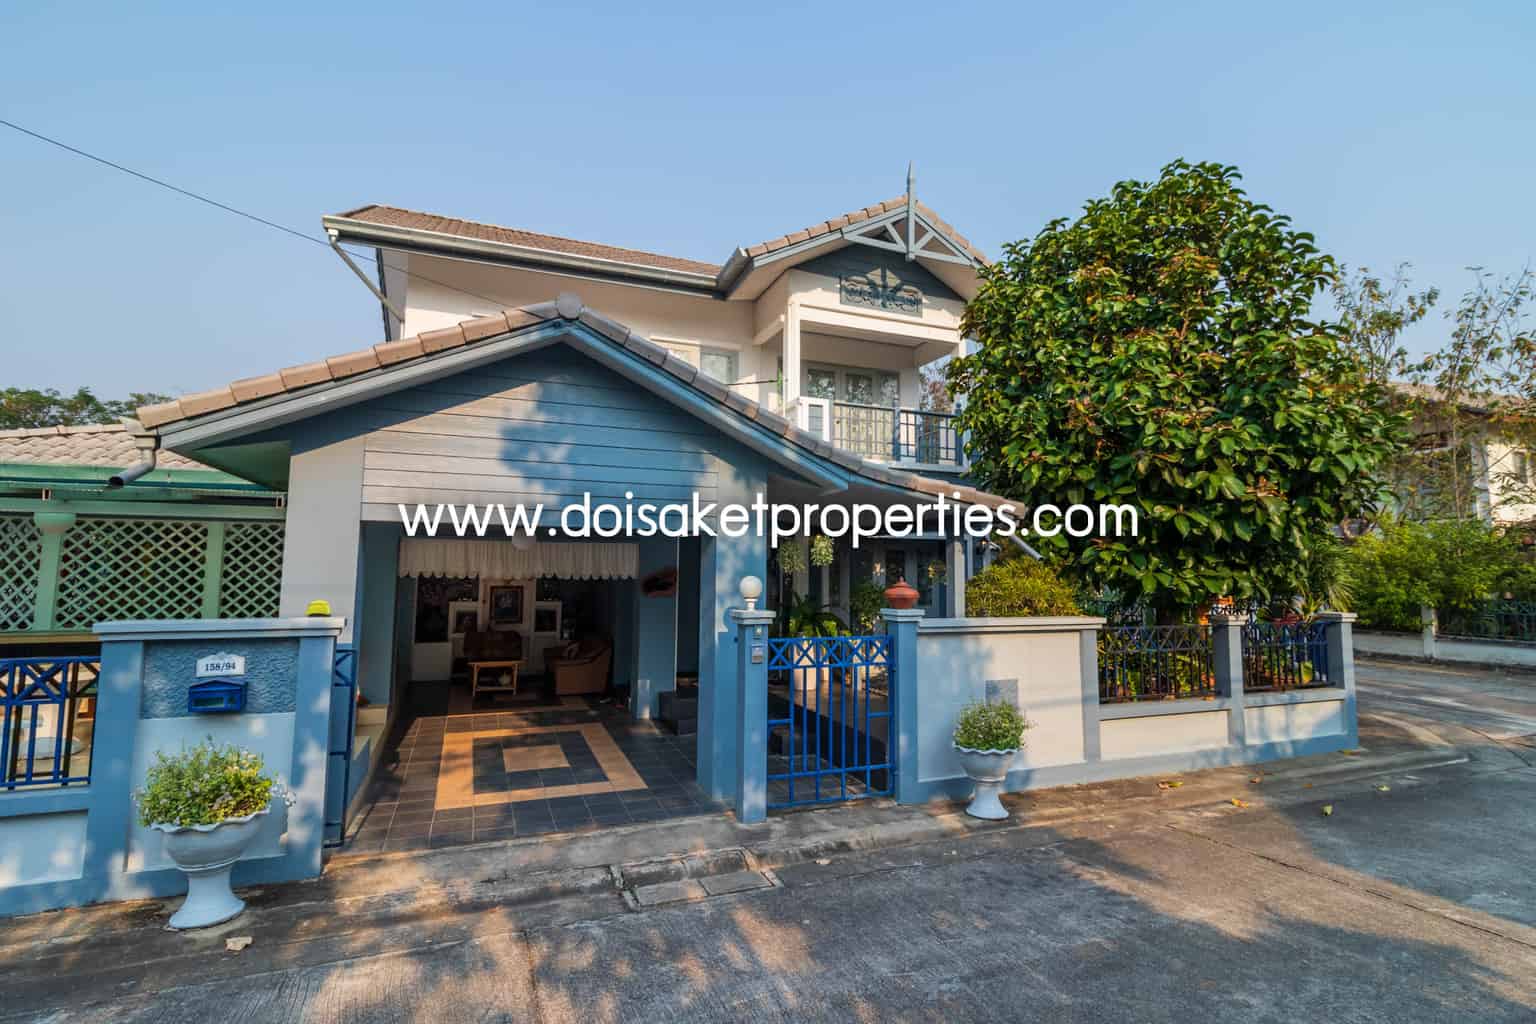 Doi Saket-DSP-(HS291-03) One-of-a-Kind 2-Storey Family Home for Sale in a Moo Ban in Doi Saket